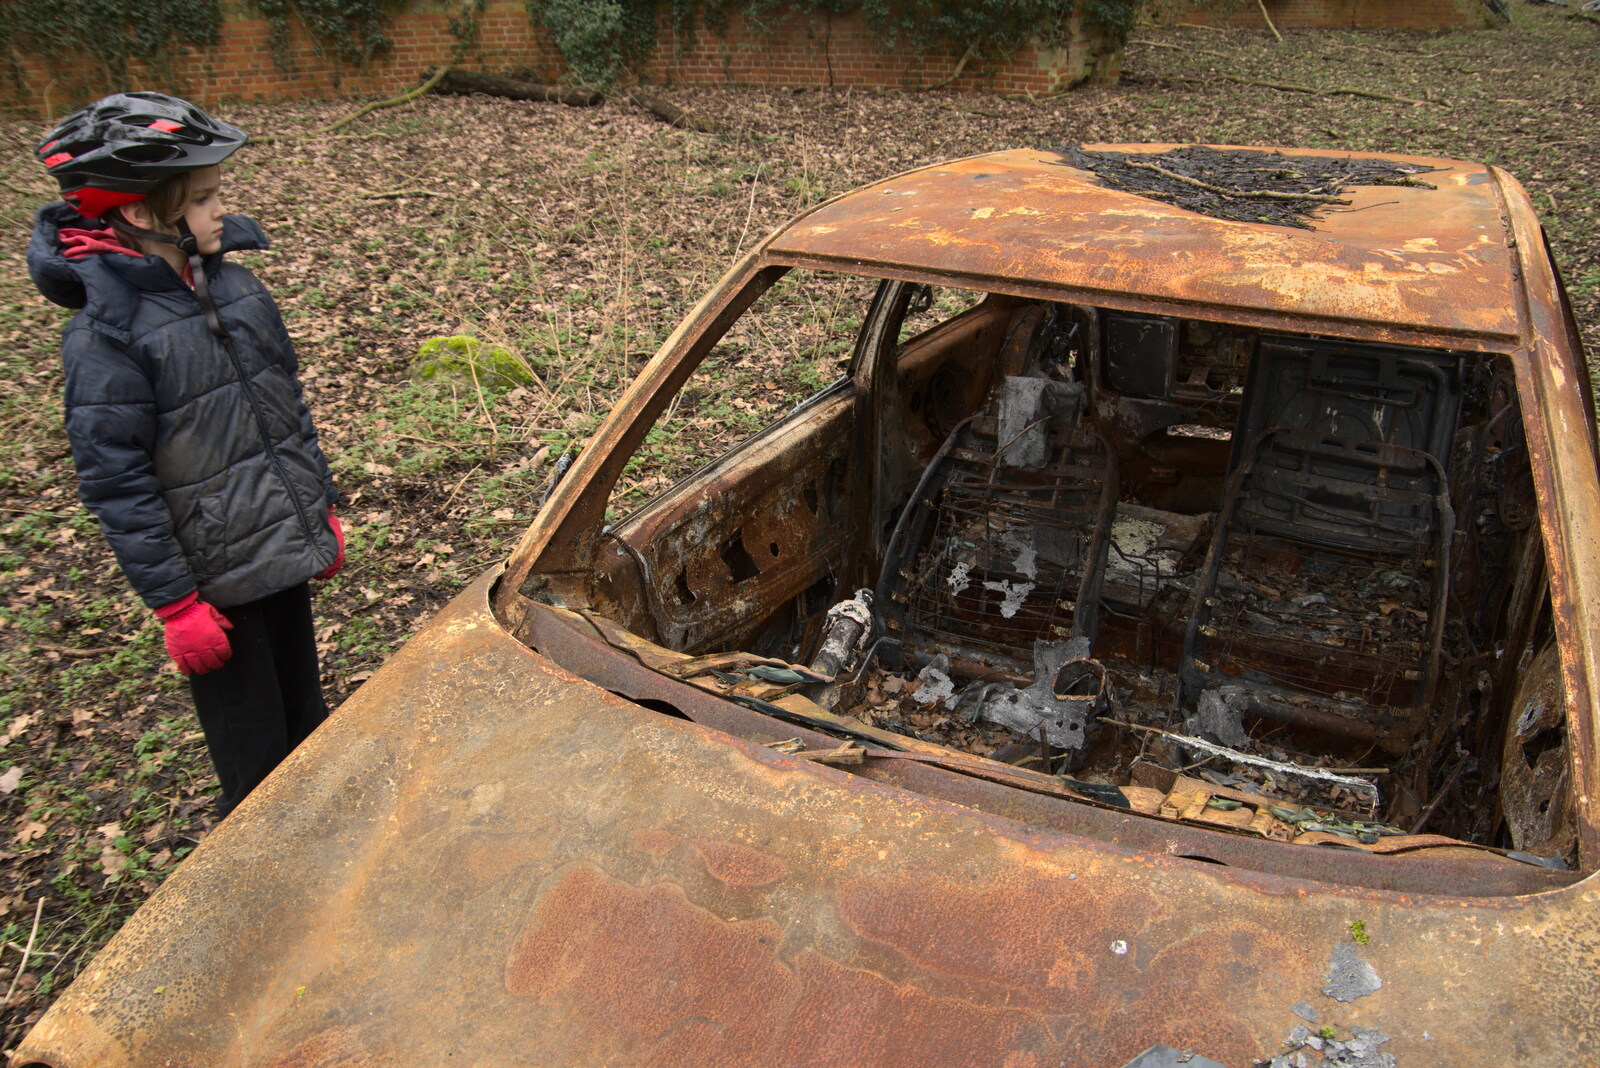 Harry looks at the wrecked car from The Old Sewage Works, The Avenue, Brome, Suffolk - 20th February 2021